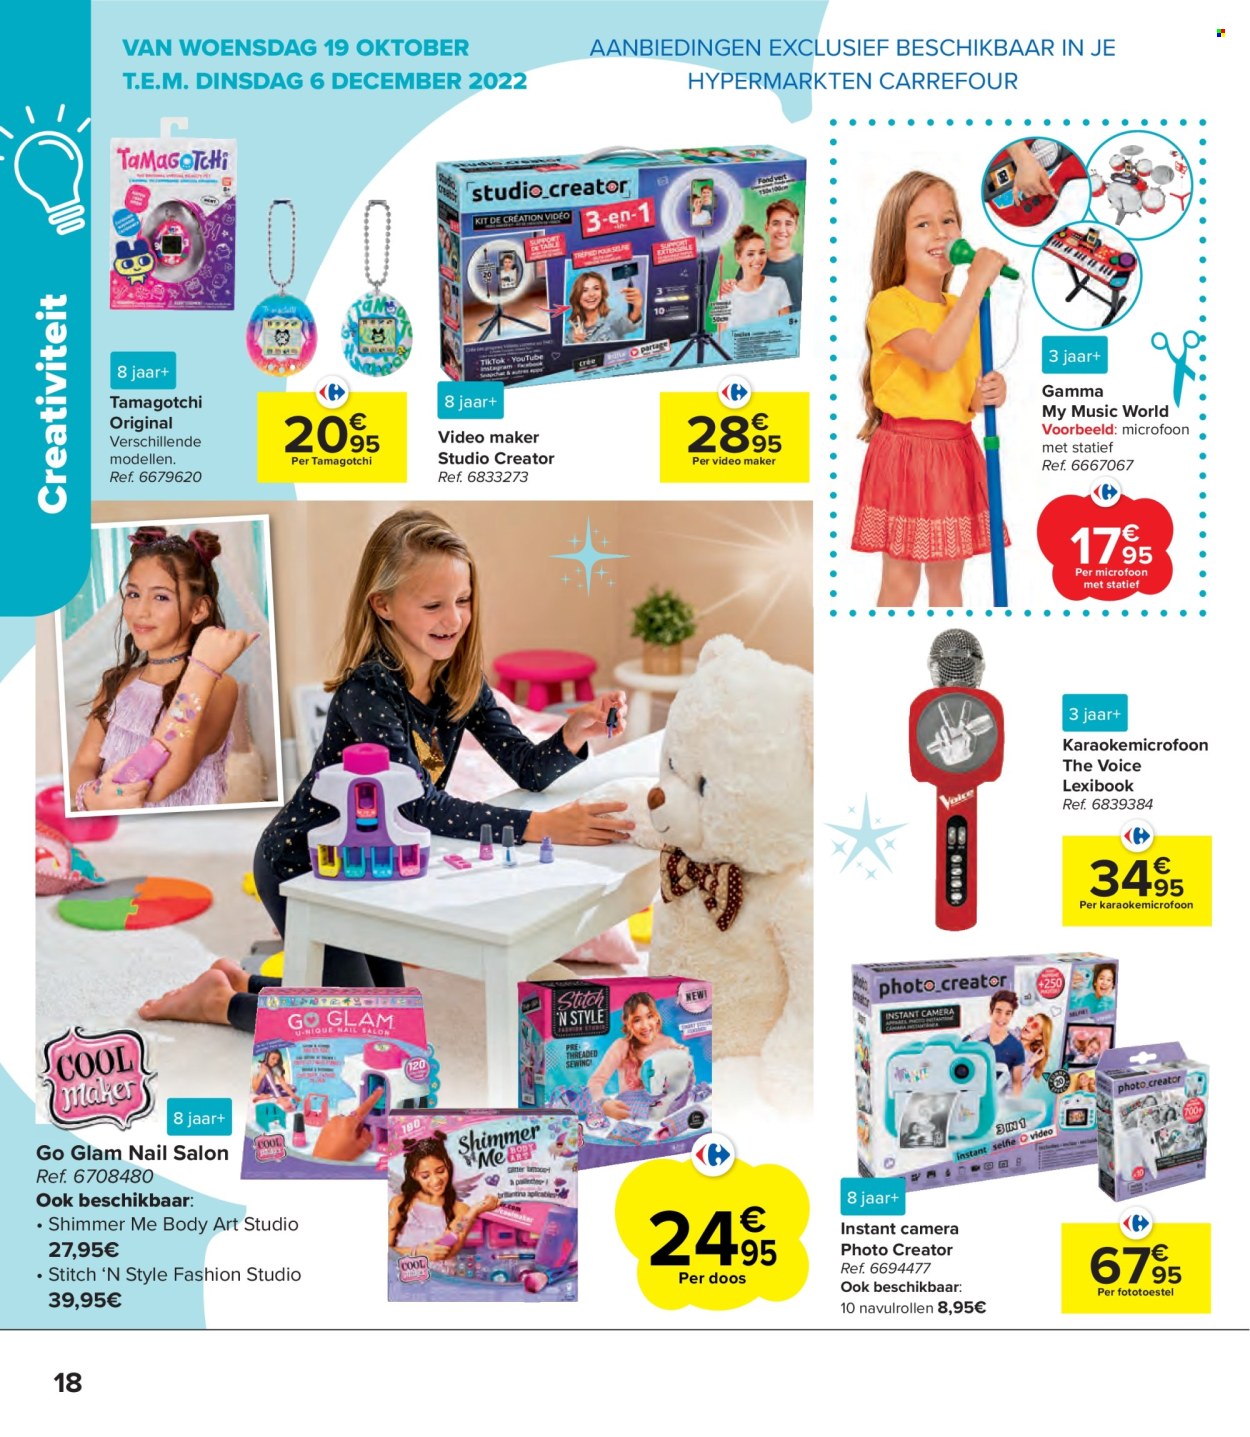 Catalogue Carrefour hypermarkt - 19.10.2022 - 6.12.2022. Page 18.